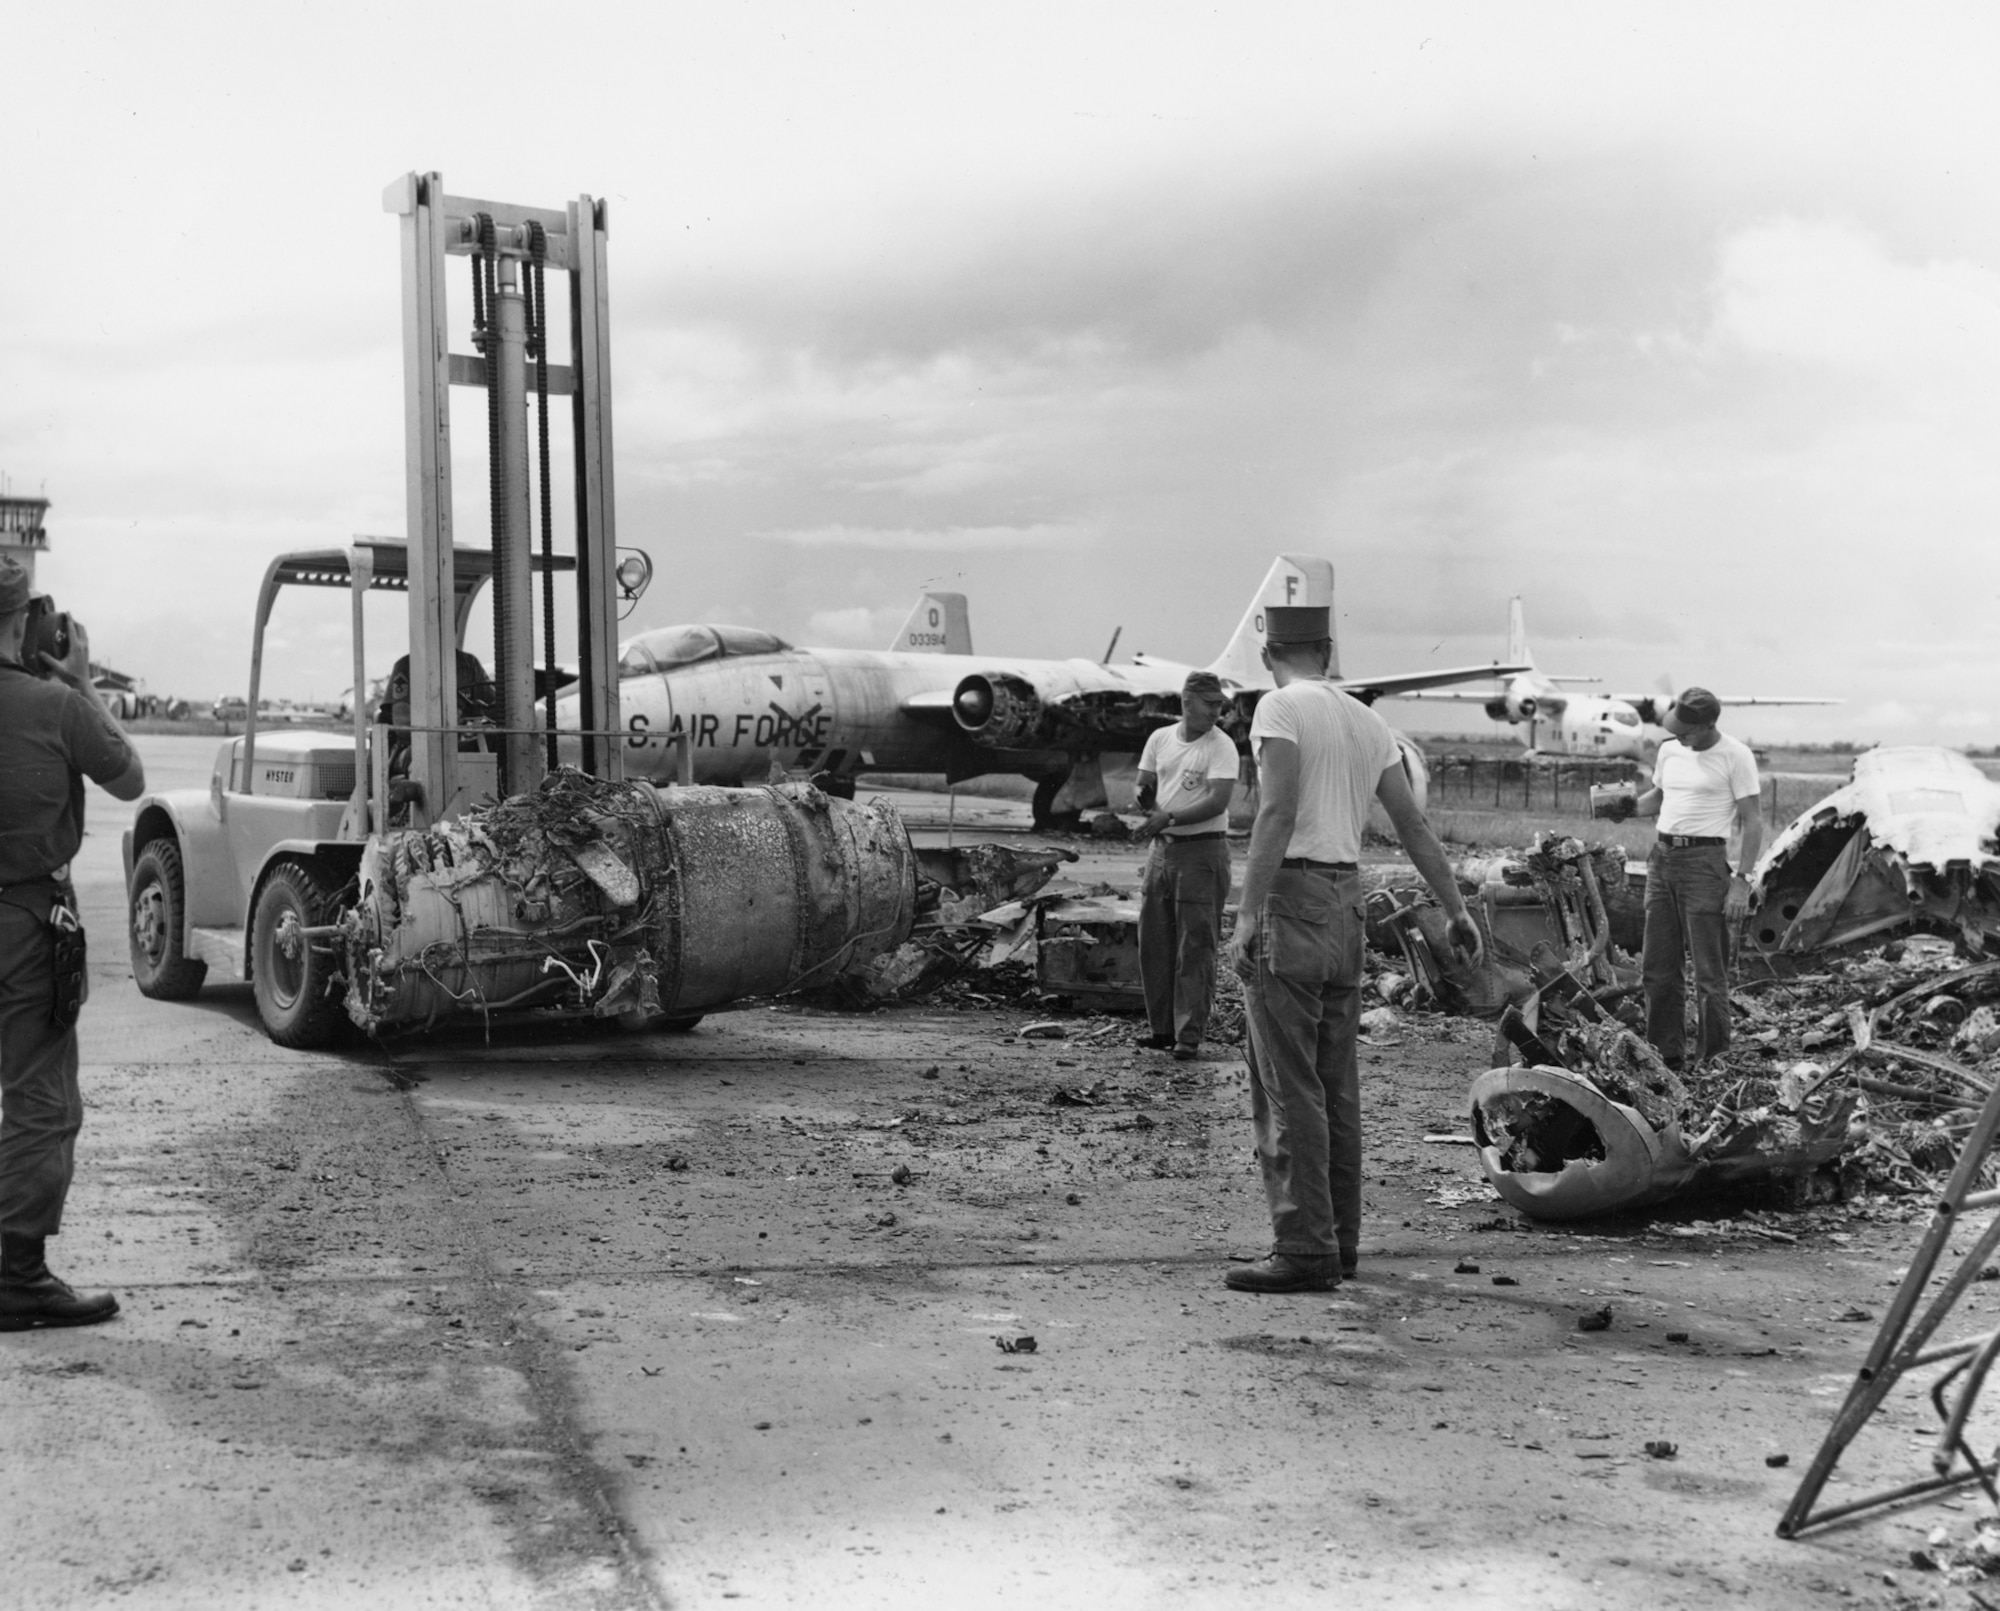 A Viet Cong mortar attack on Bien Hoa Air Base in November 1964 marked a major escalation in hostilities. Four Americans died and 72 were wounded. (U.S. Air Force photo).